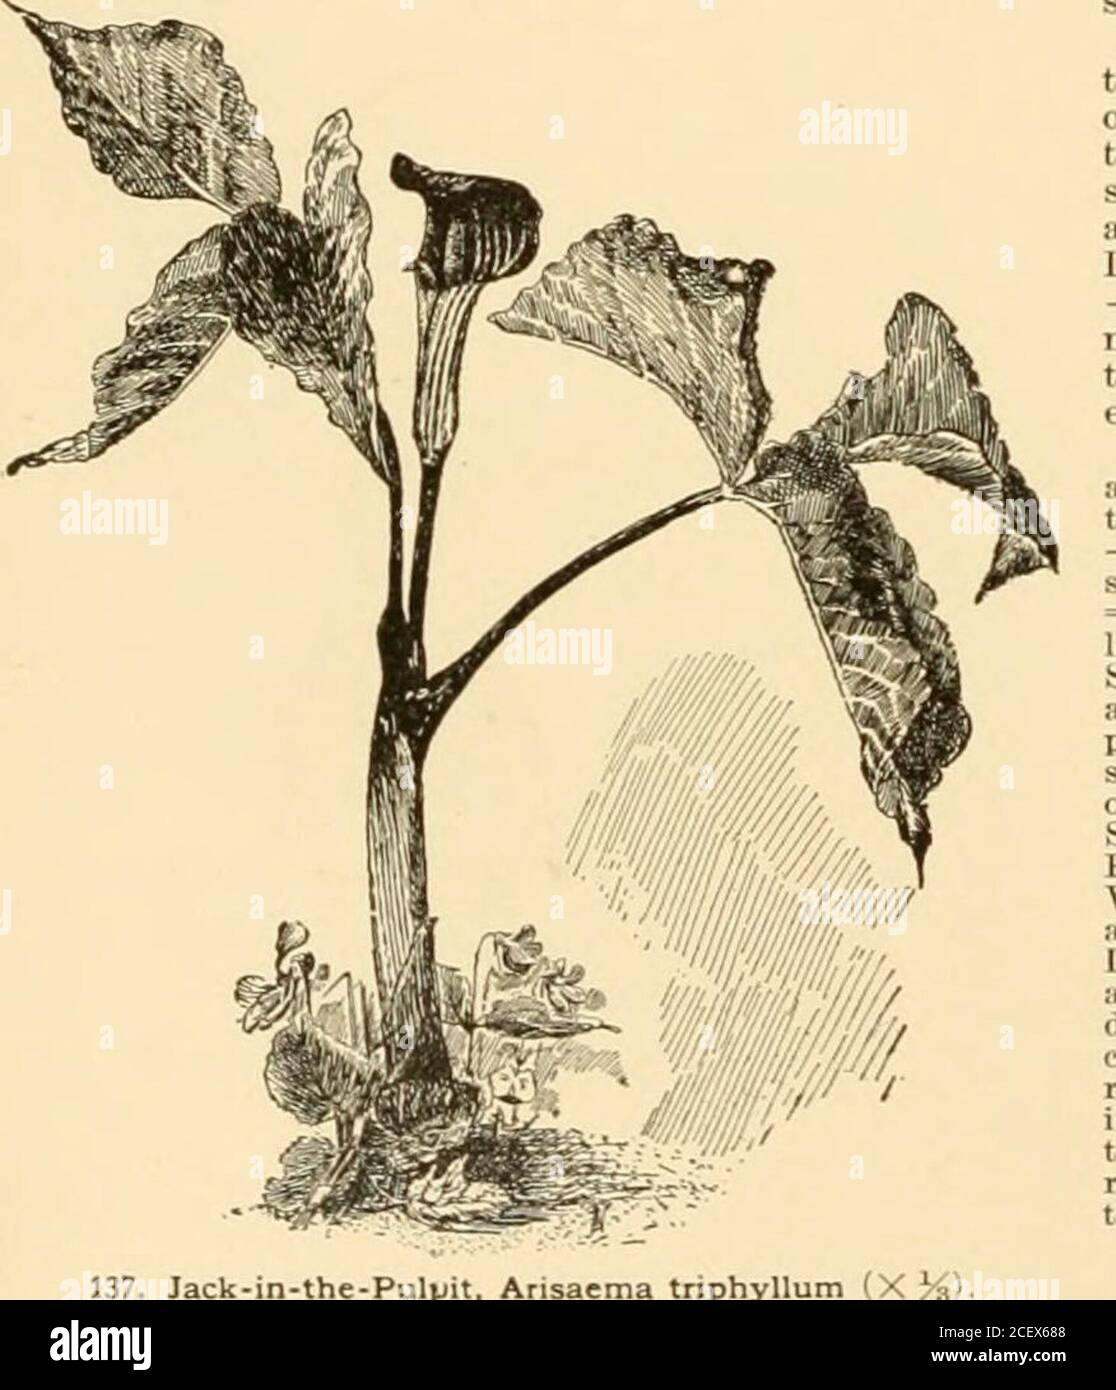 . Cyclopedia of American horticulture : comprising suggestions for cultivation of horticultural plants, descriptions of the species of fruits, vegetables, flowers, and ornamental plants sold in the United States and Canada, together with geographical and biographical sketches. 138. Aristolochia macrophylla. covered by the arching purplish spathe. Common inwoods. G.W.F. 28. D. 281. —Tuber or corm flatfish andlarge, very acrid, often employed as a domestic remedy.Berries red and showy, ripening in early summer.Planted in a moist, shady place, the lvs. remain untilfall; but in exposed places they Stock Photo